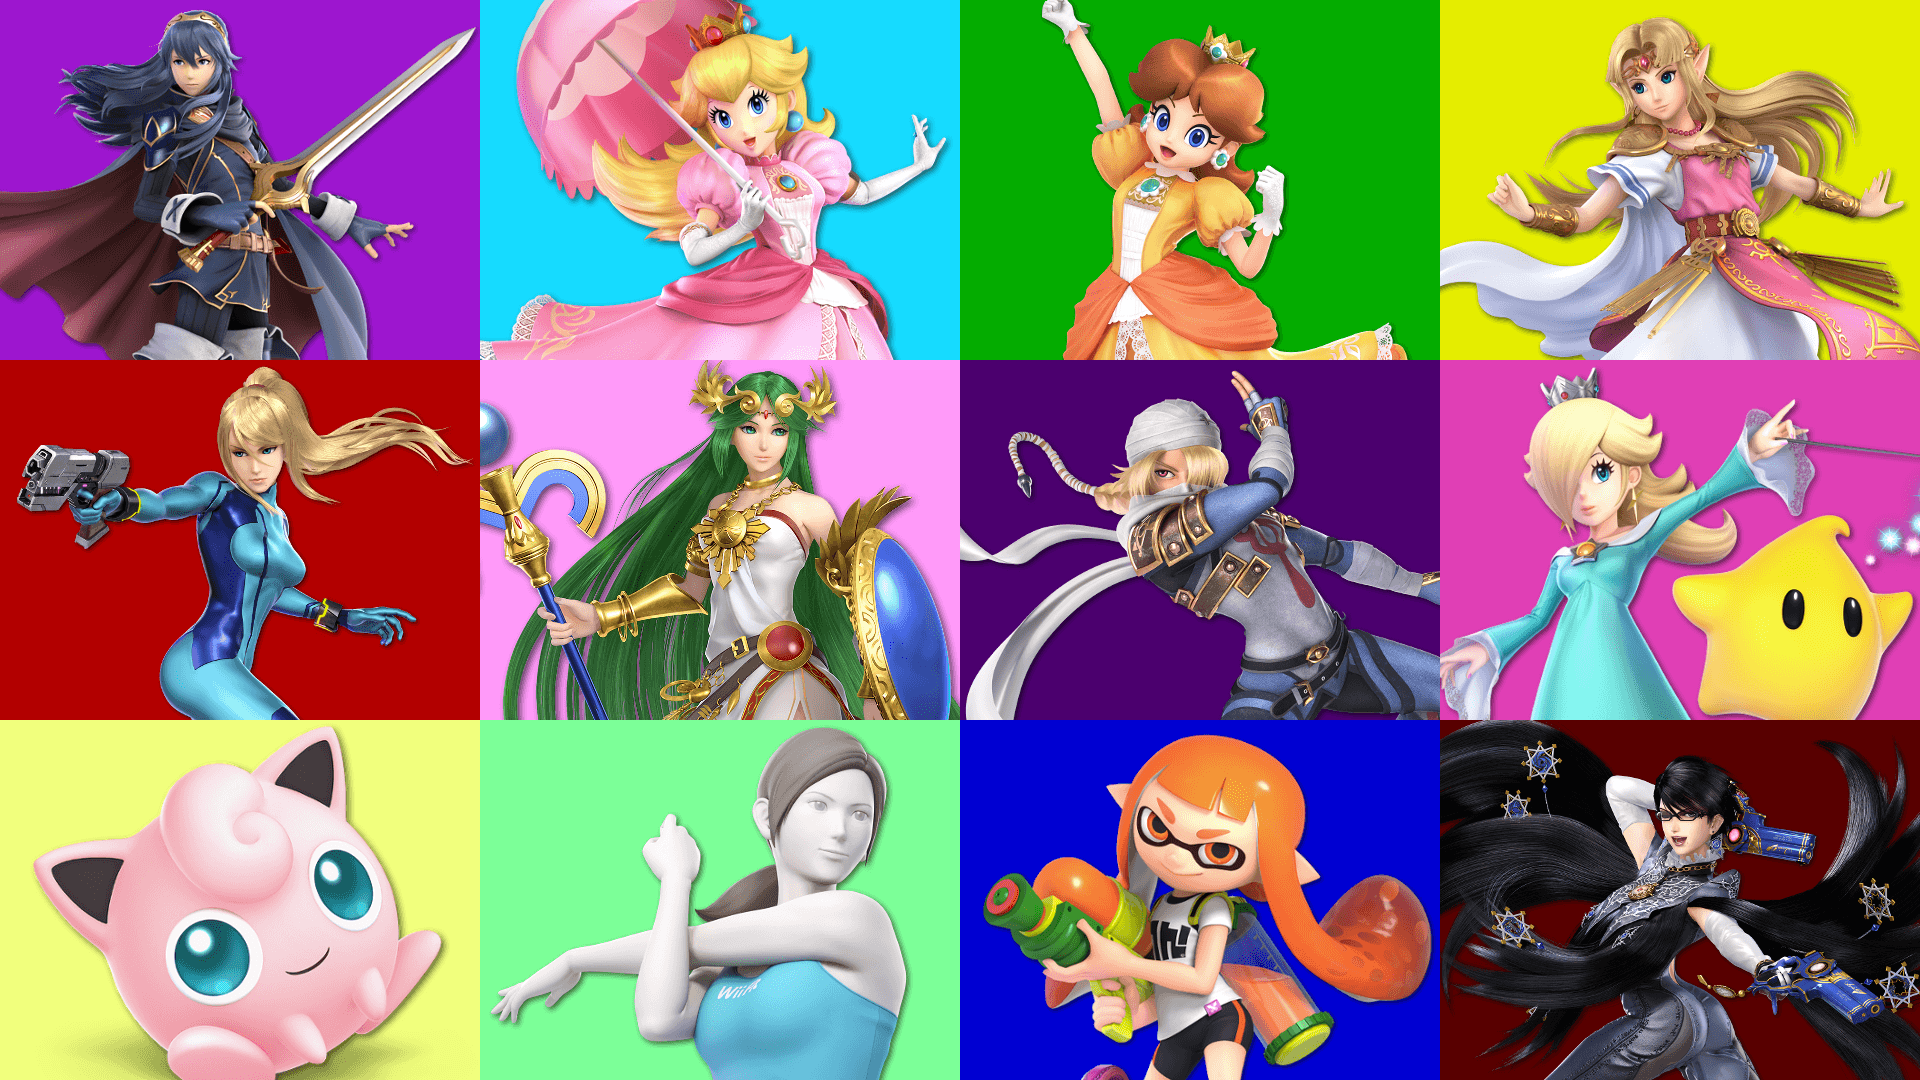 For Fun I threw together a little wallpaper featuring the ladies